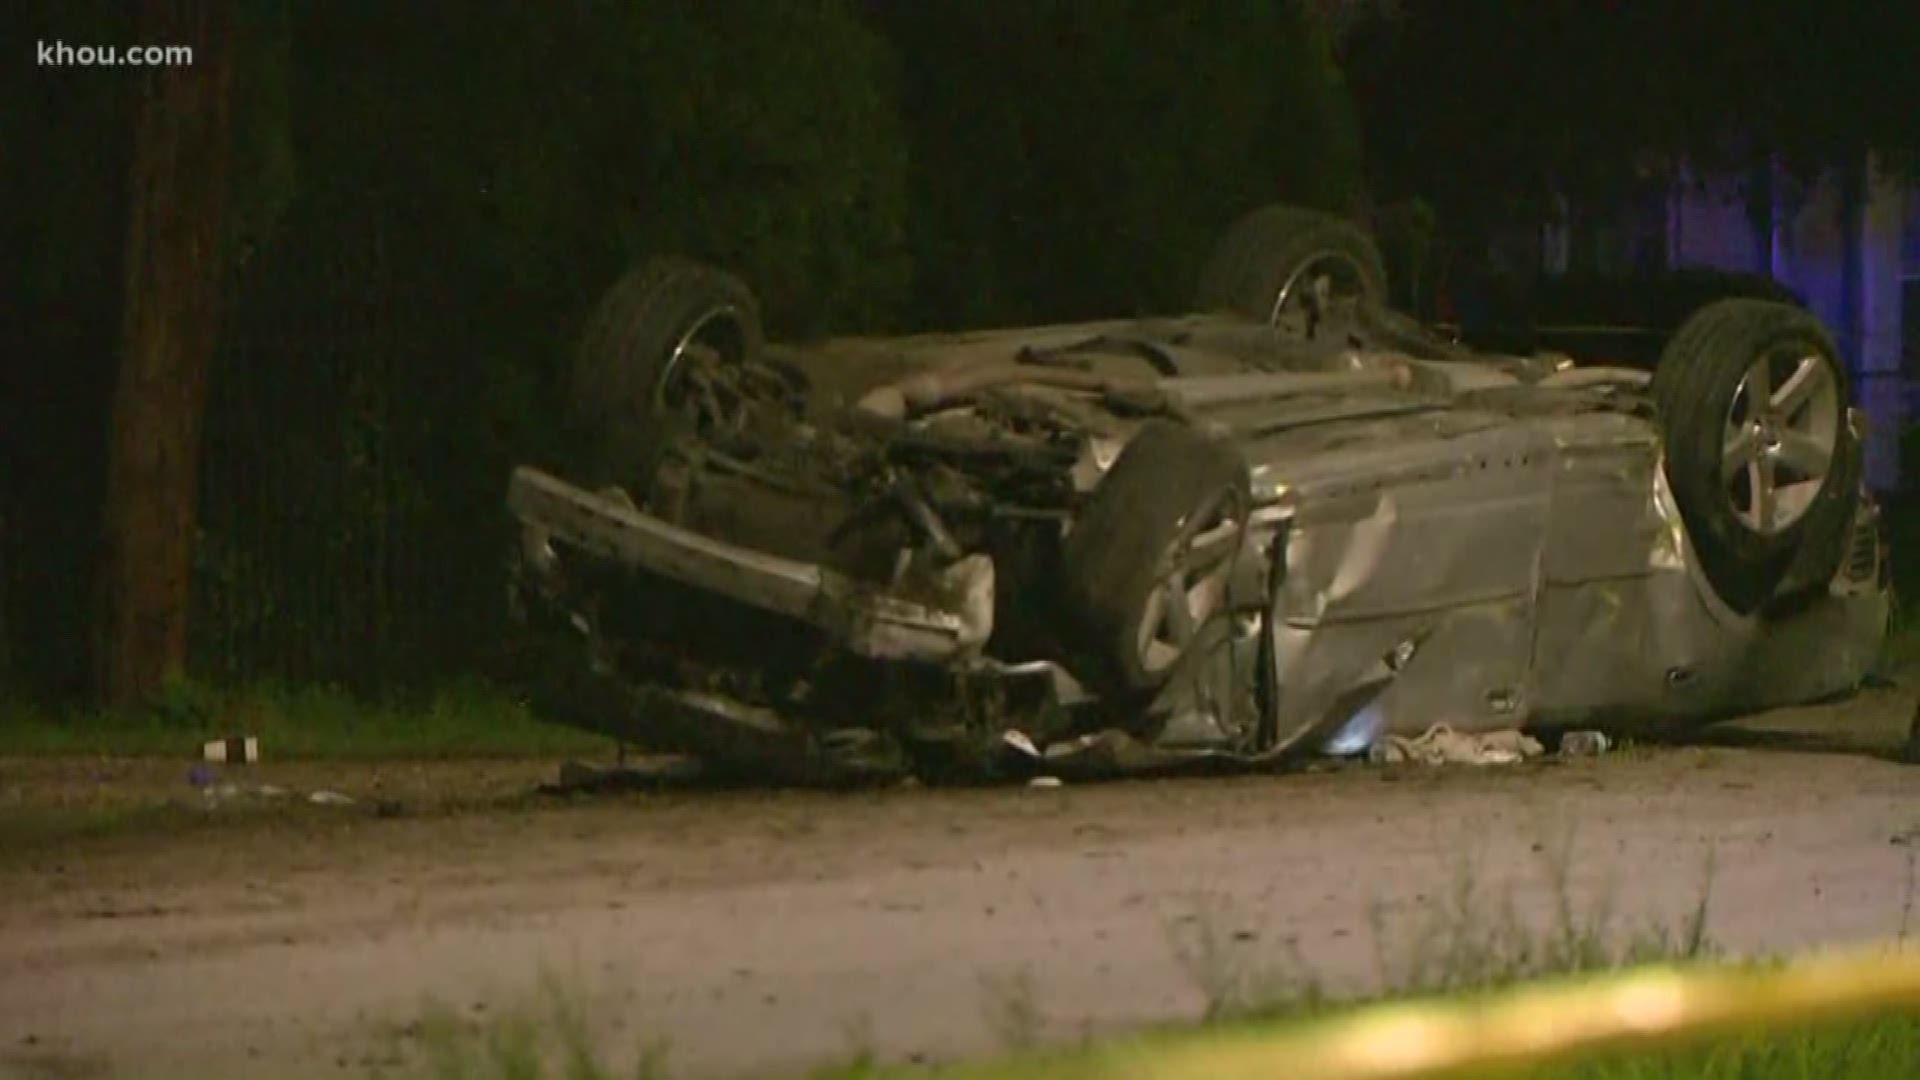 At least two people died and a third person was trapped after a rollover crash in northeast Houston, police confirm.